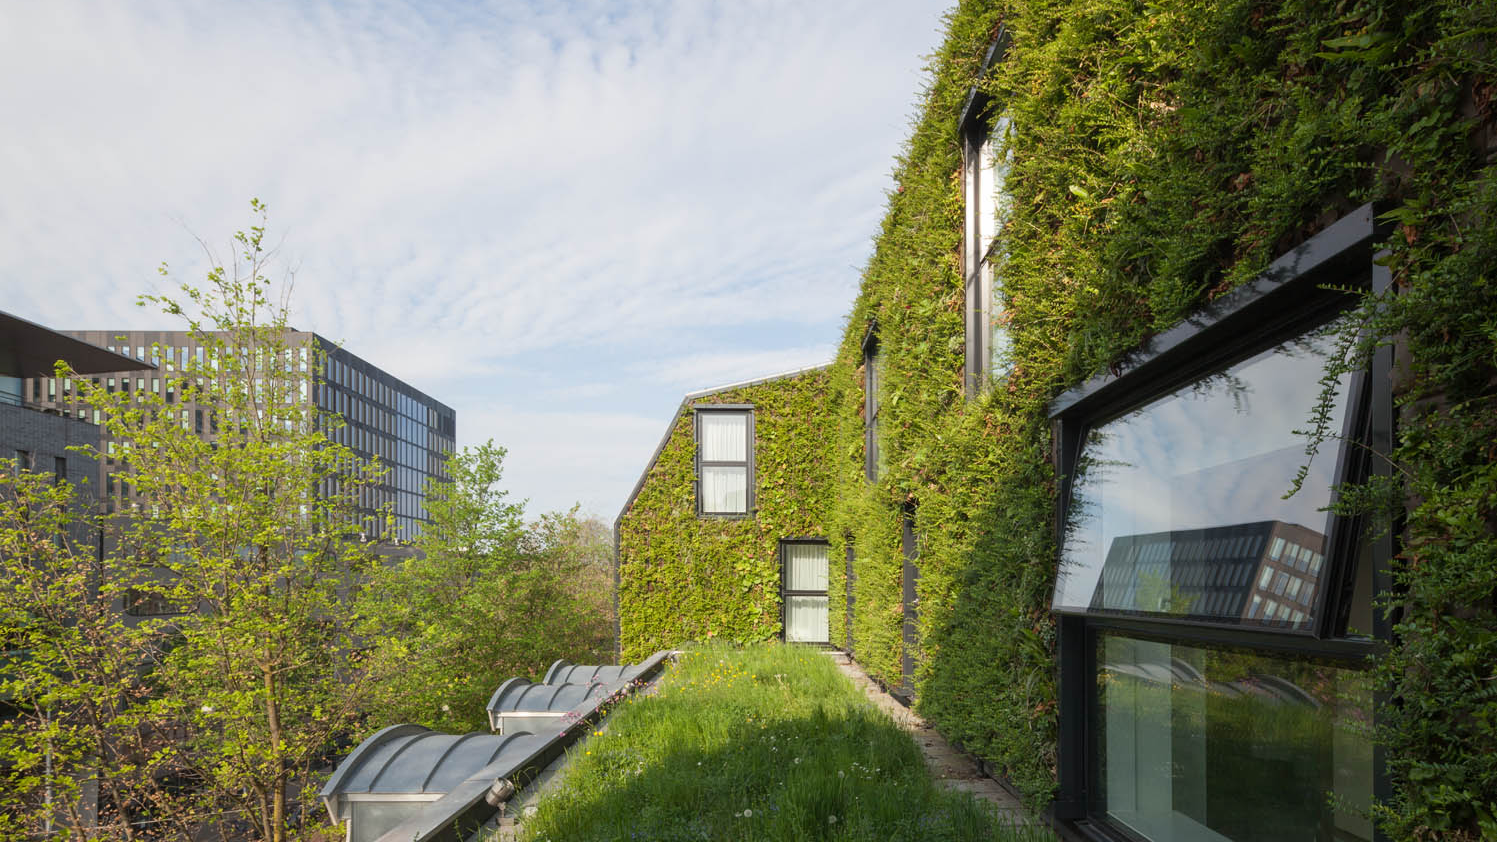 Image green roof and wall